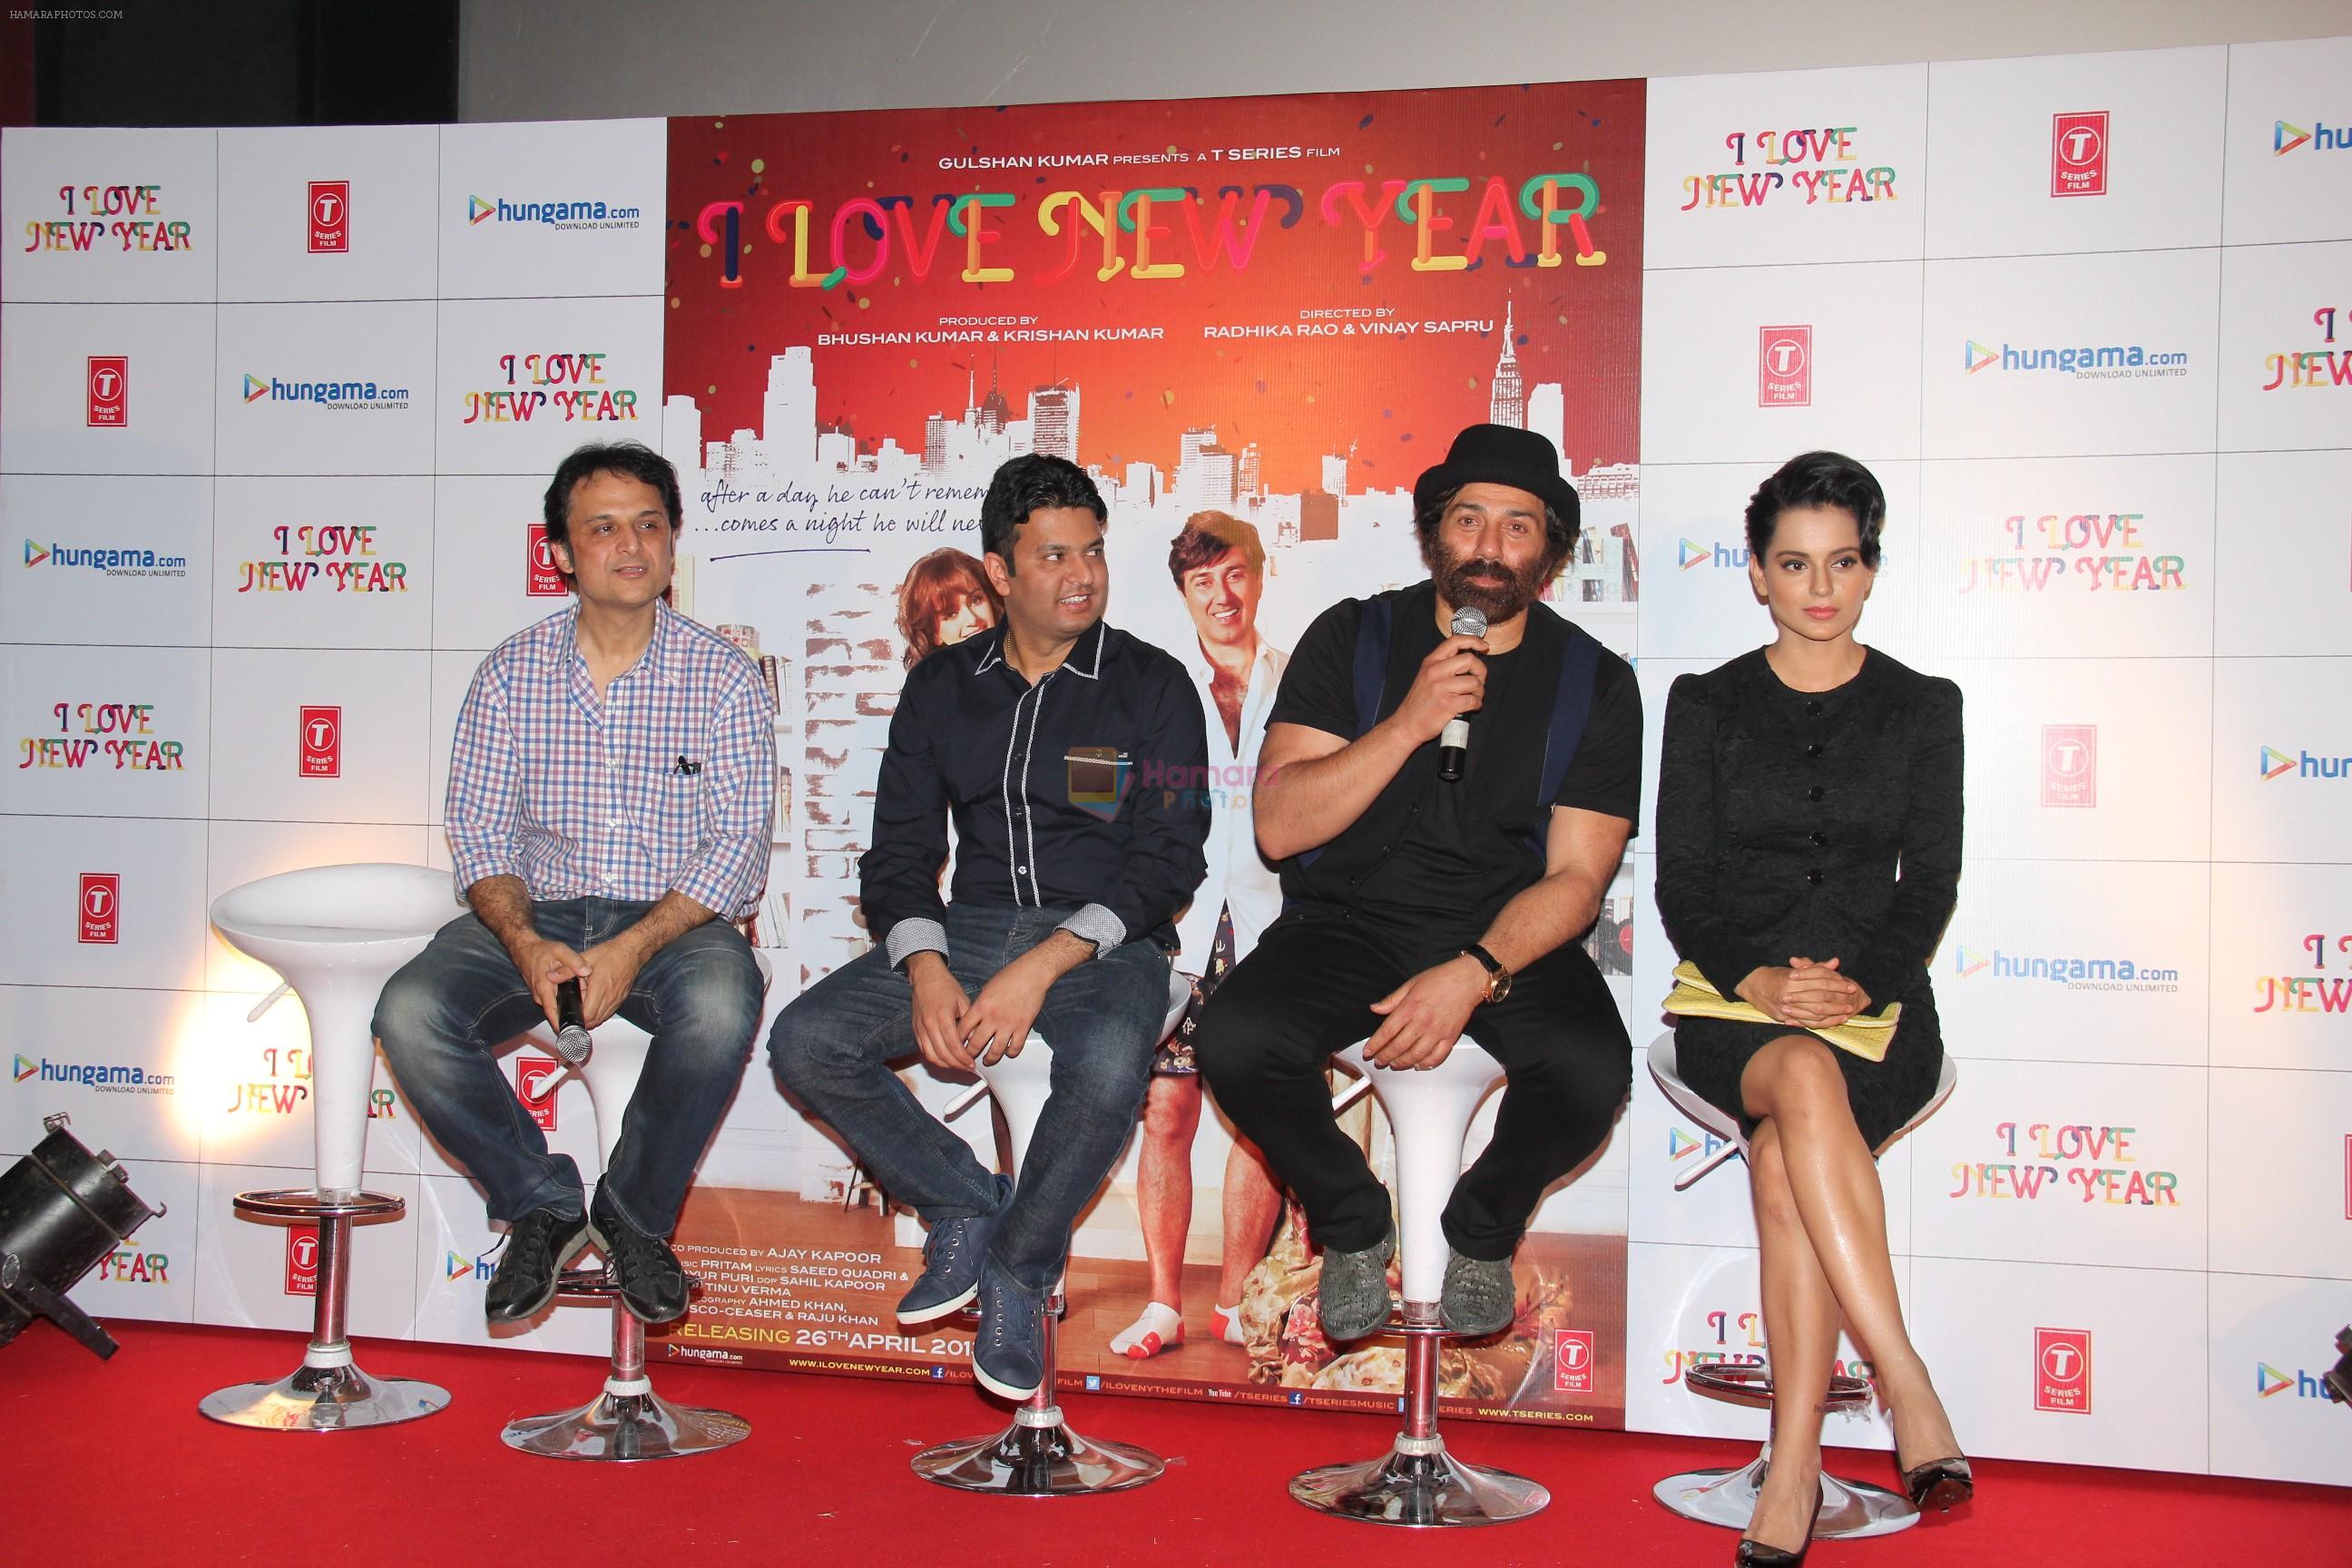 Sunny Deol, Kangana Ranaut, Bhushan Kumar at the theatrical of I Love NY (New Year) was launched on 25th Feb at Cinemax, Versova